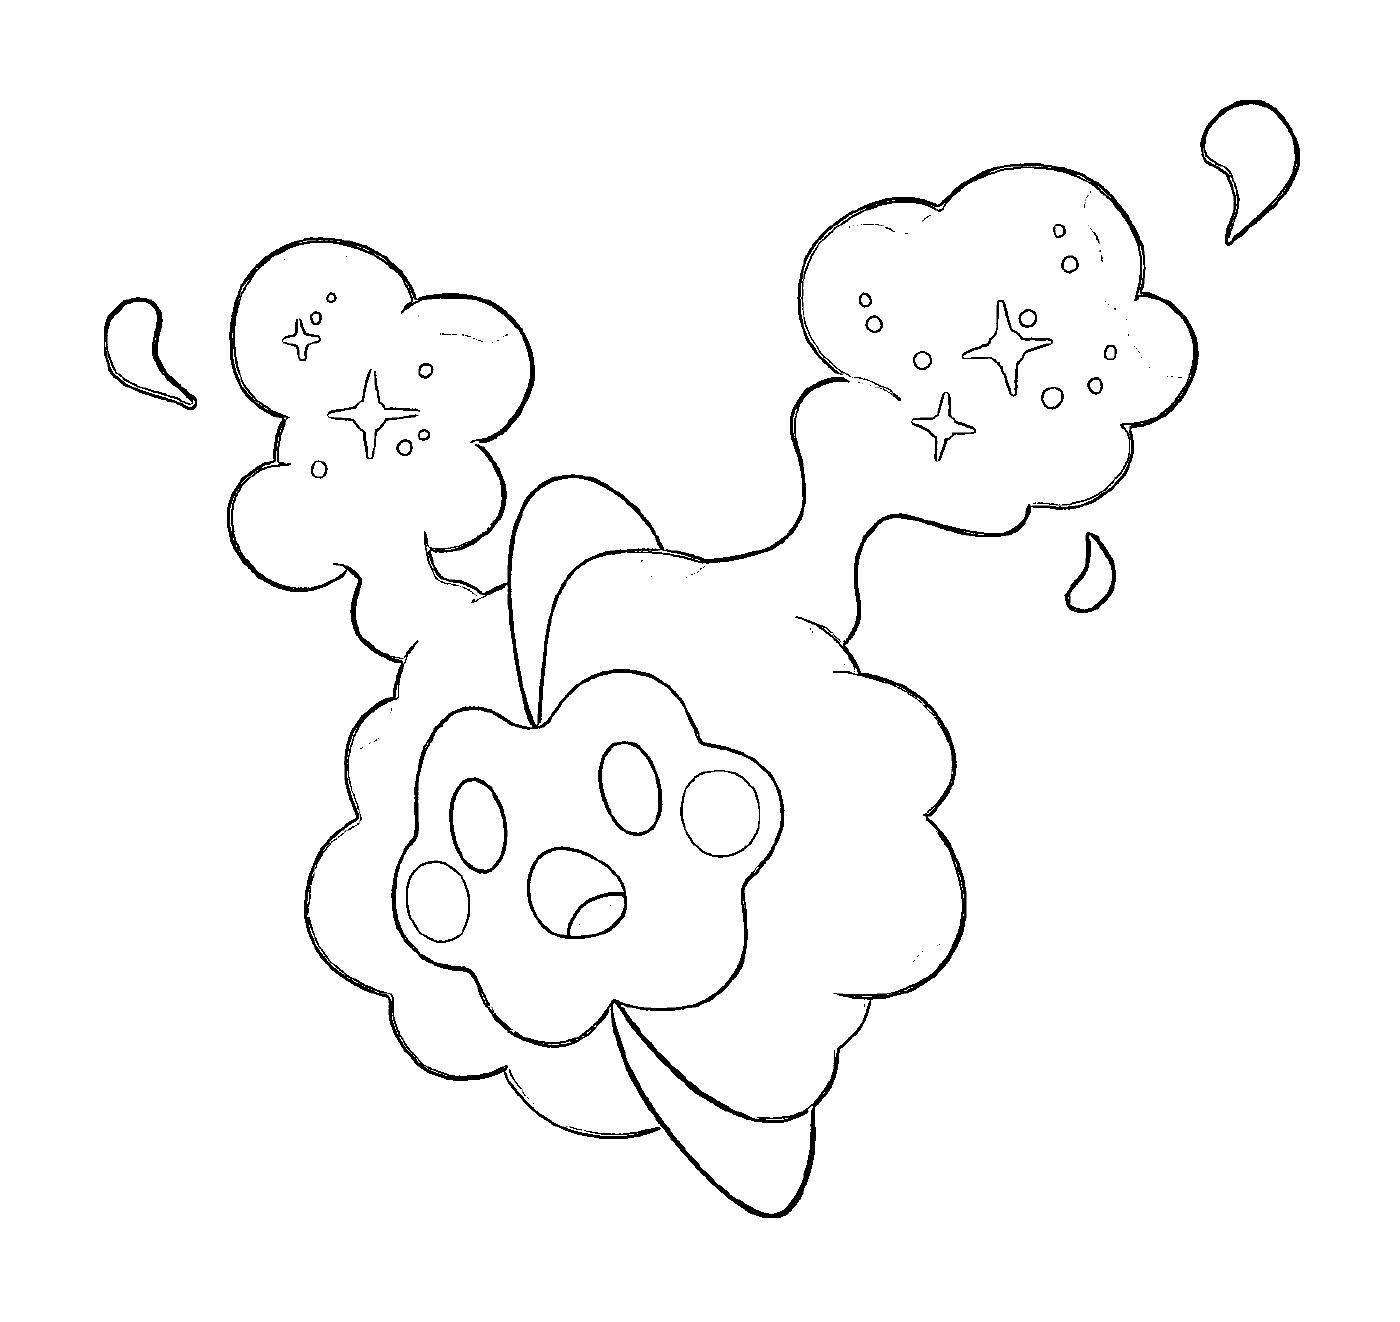  Cosmog, cloud with stars 